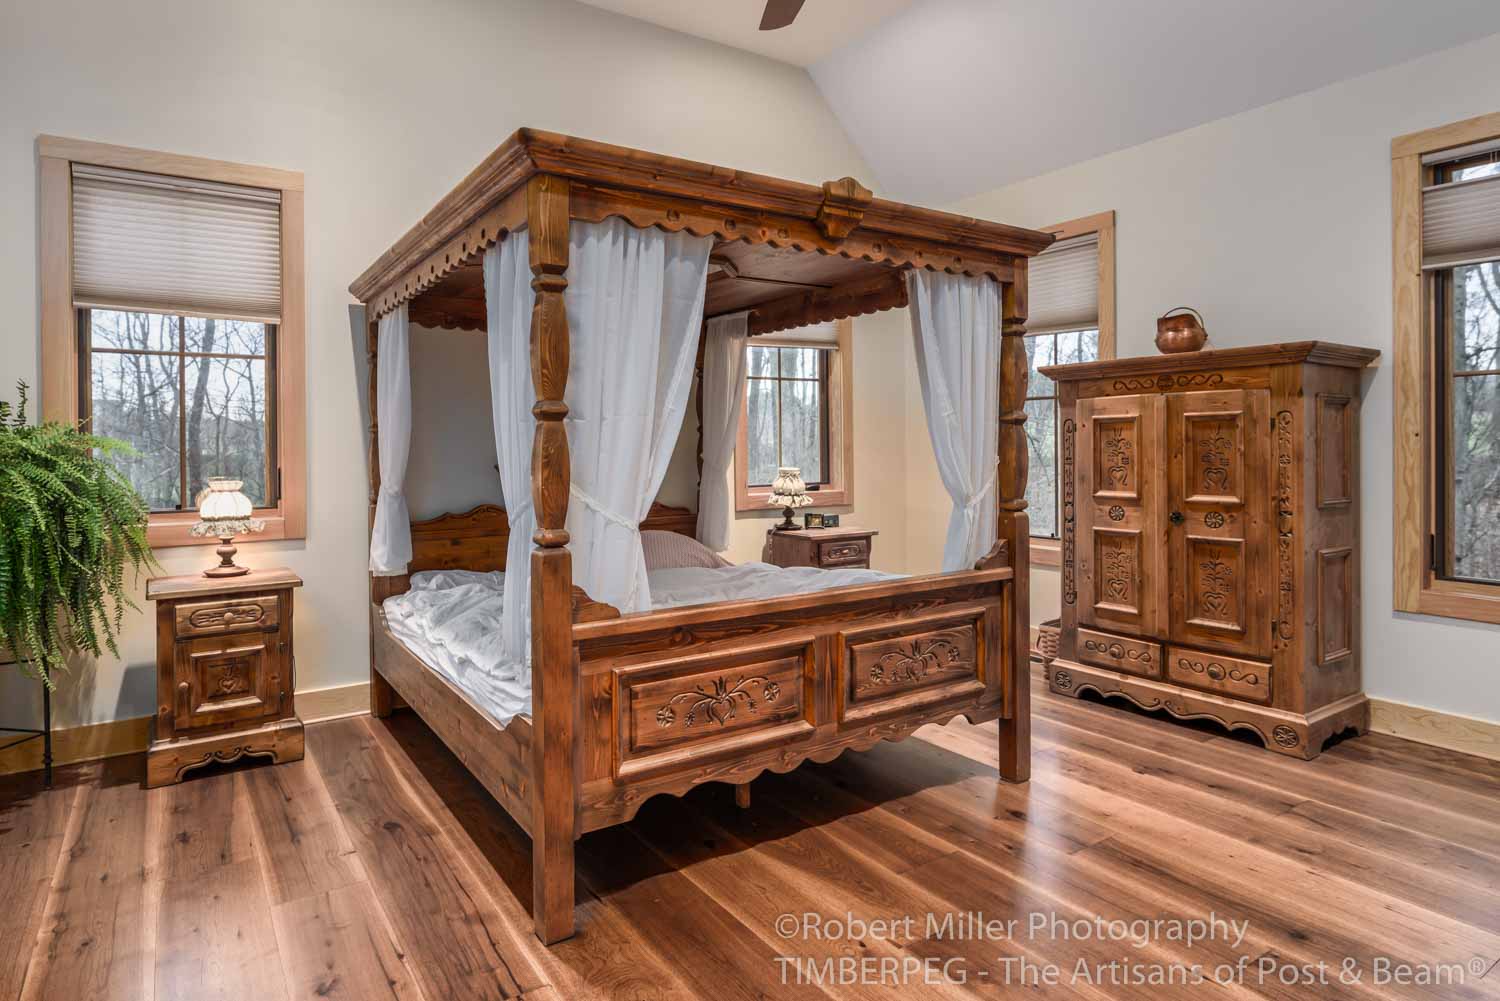 Hamilton, VA Main House (T00990) bedroom with wooden carved canopy bed